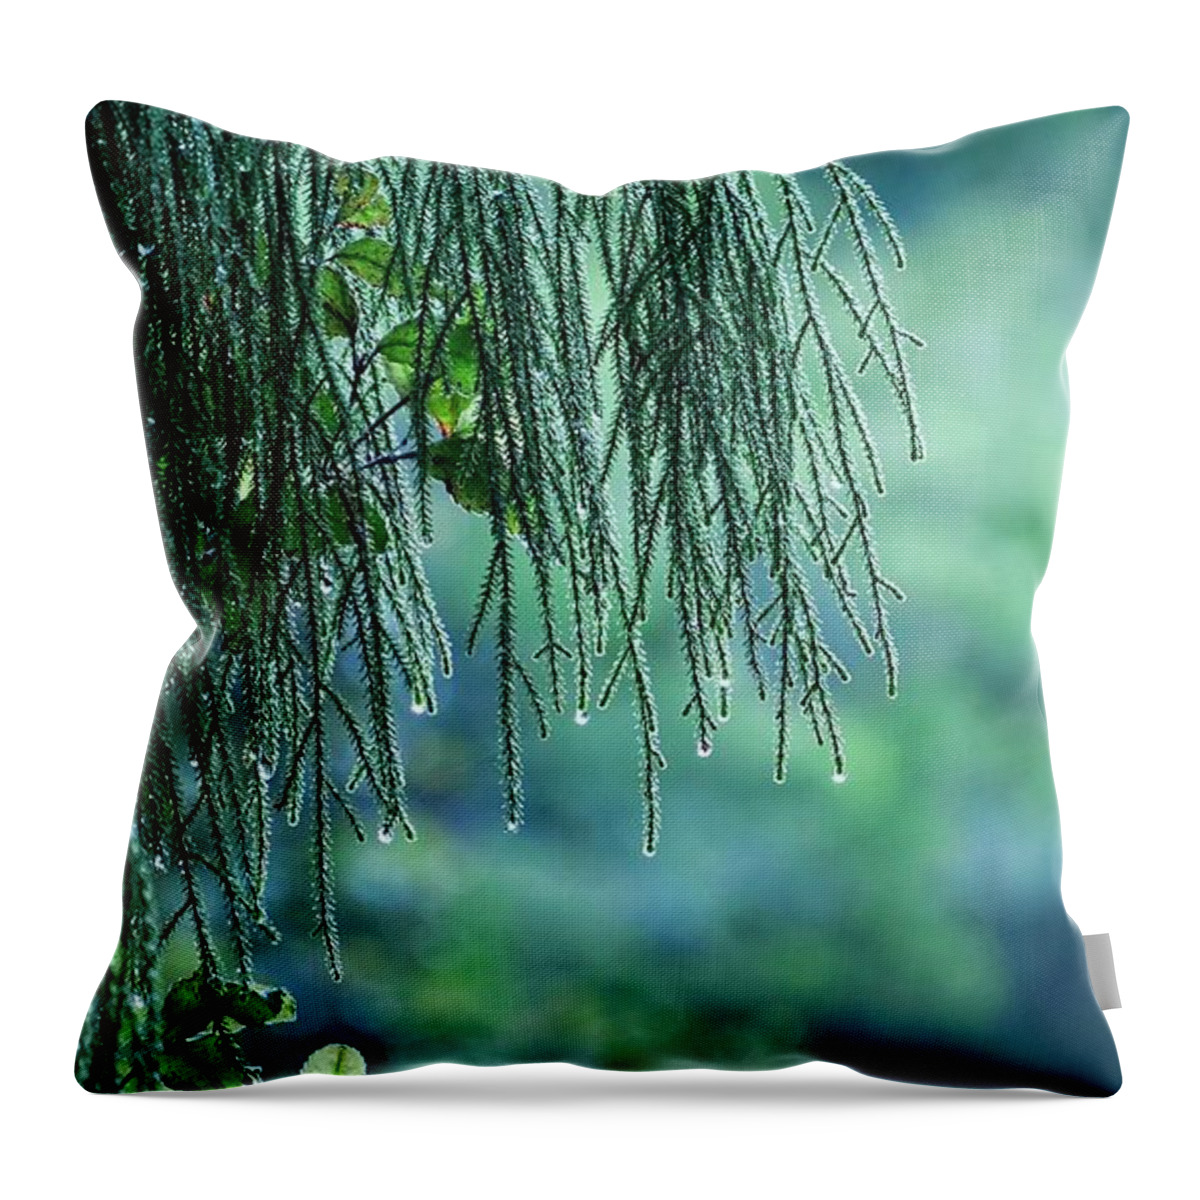 New Zealand Throw Pillow featuring the photograph Conifer Tree at Dawn, New Zealand by Steven Ralser